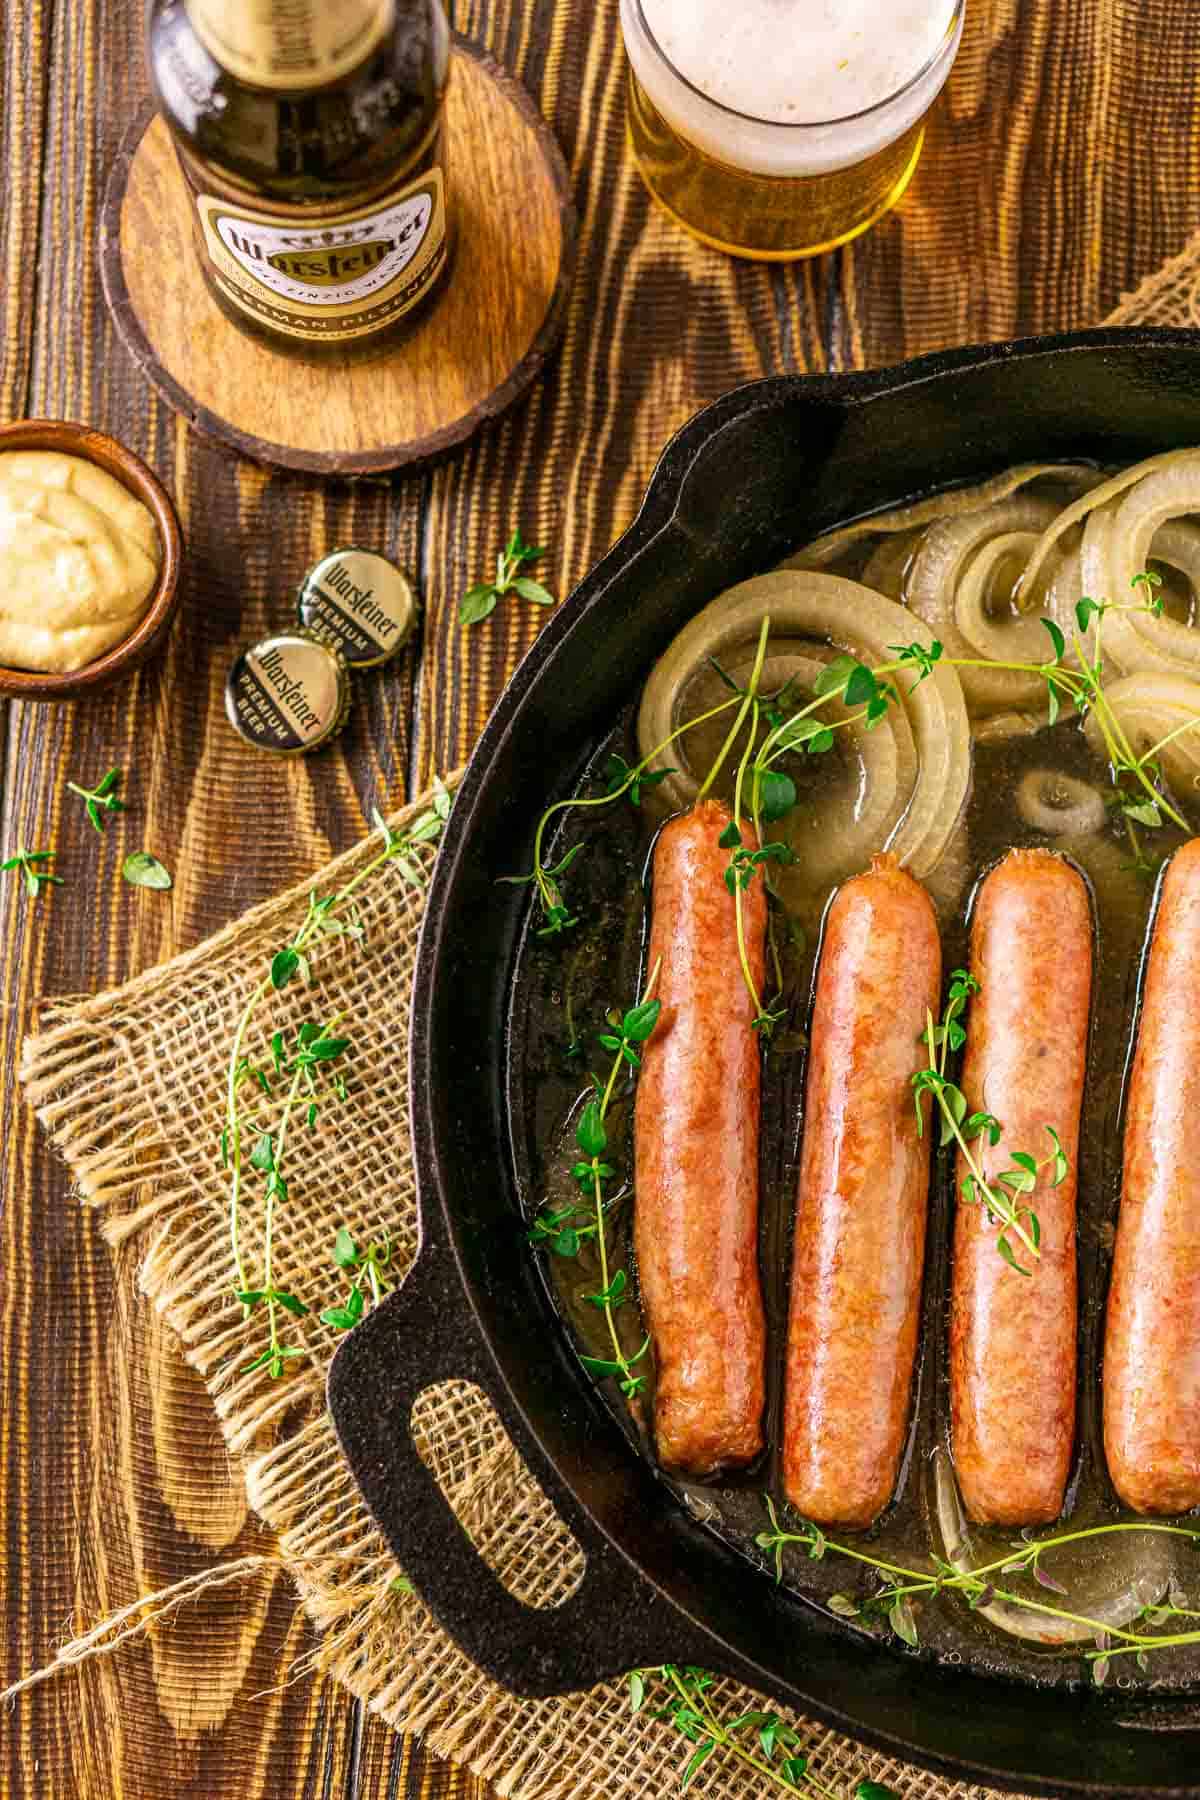 How To Cook Brats In An Electric Skillet